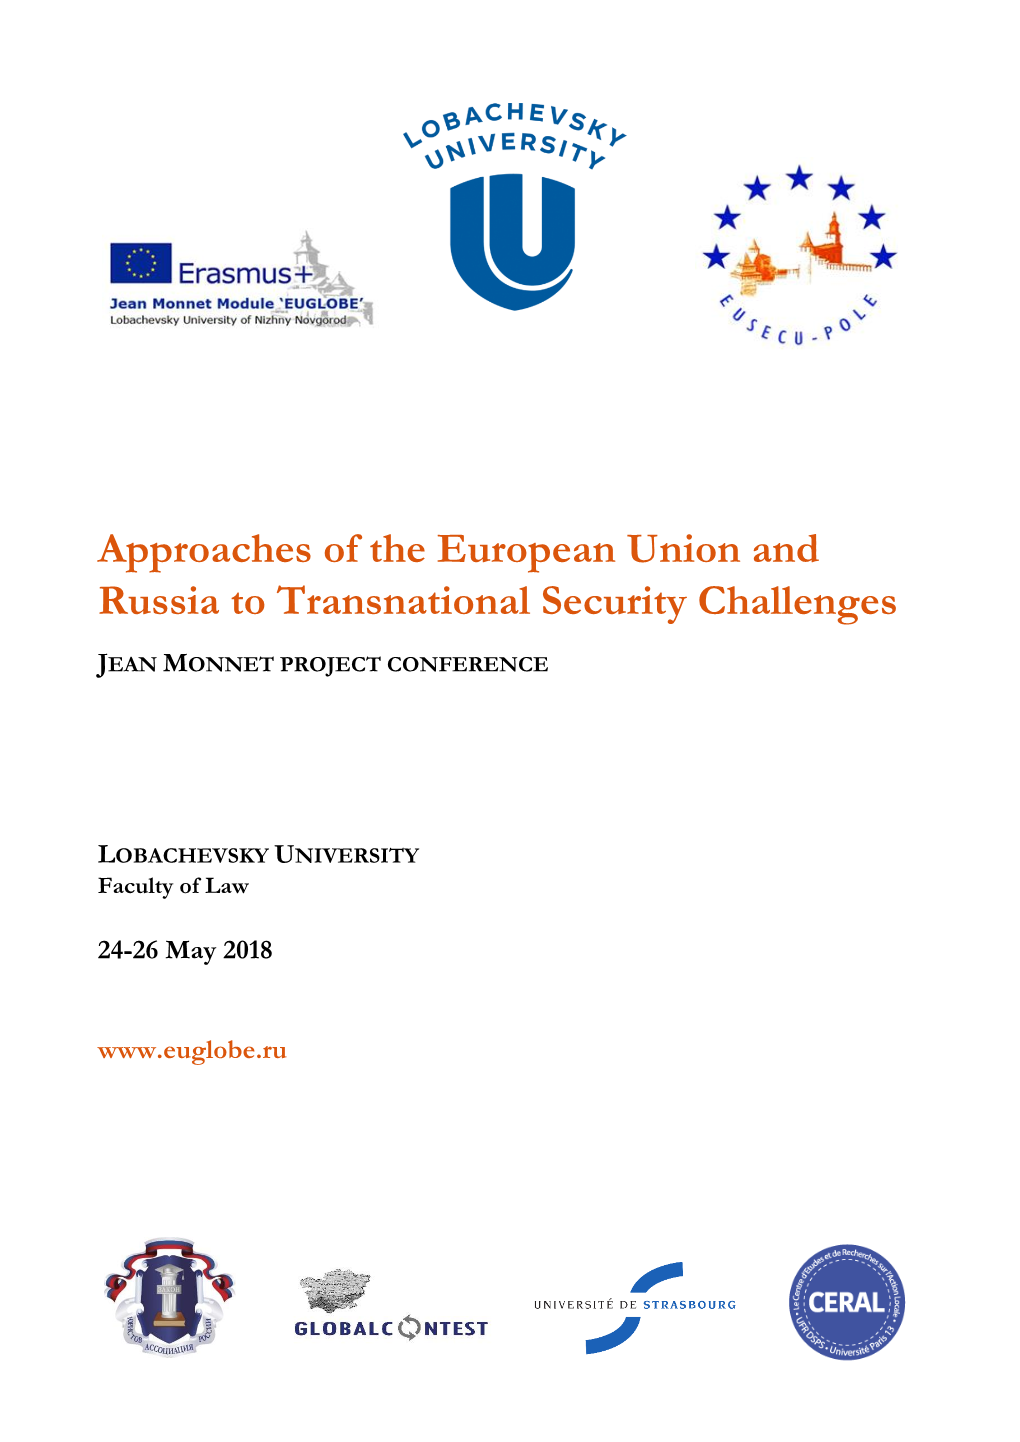 Approaches of the European Union and Russia to Transnational Security Challenges